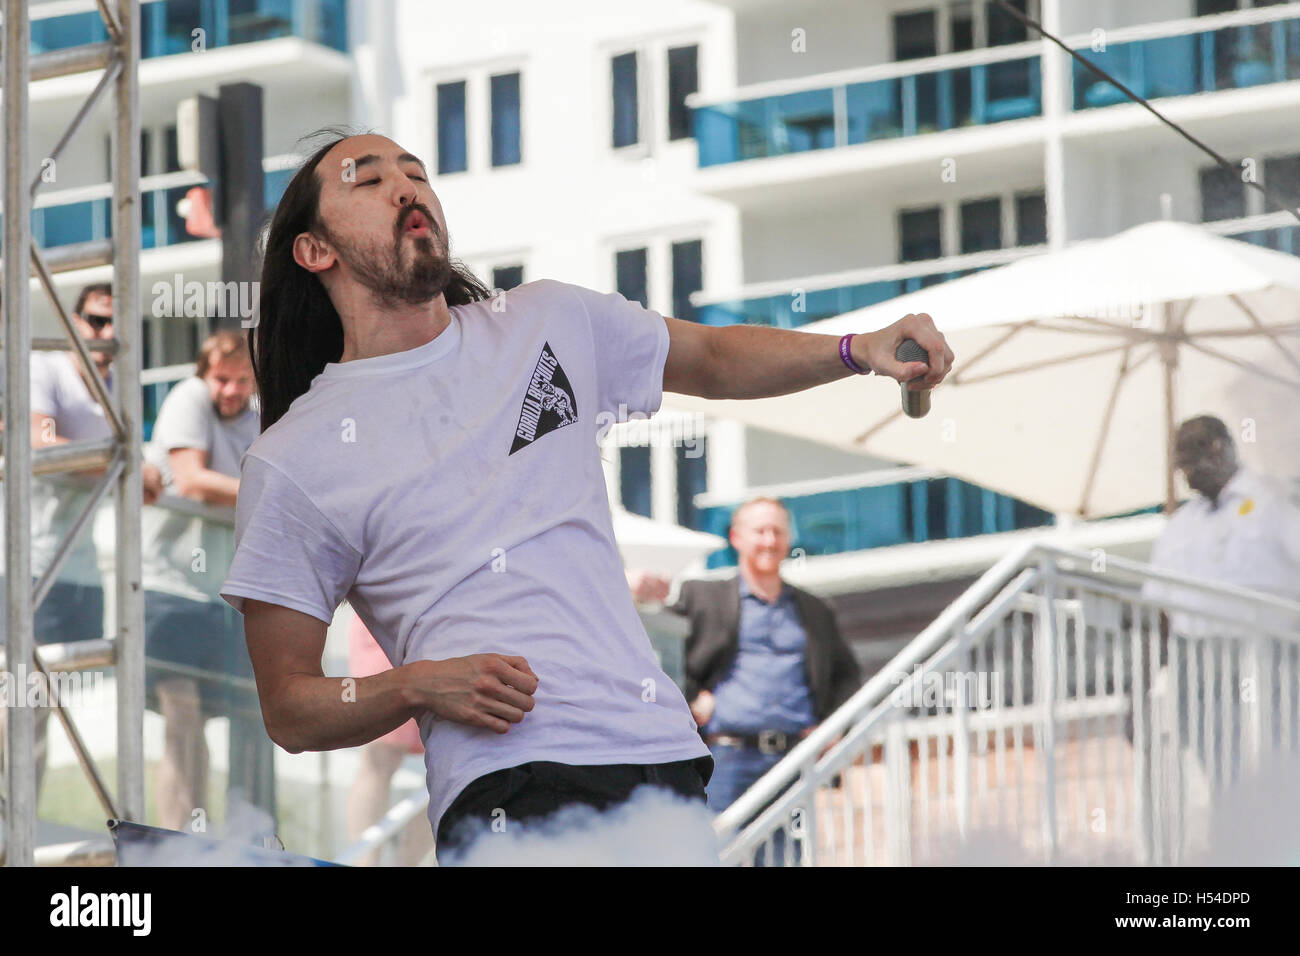 DJ Steve Aoki at the Sirius XM Music Lounge on March 18, 2016 at the 1 Hotel South Beach at the Private Beach Club in Miami Beach, Florida. Stock Photo